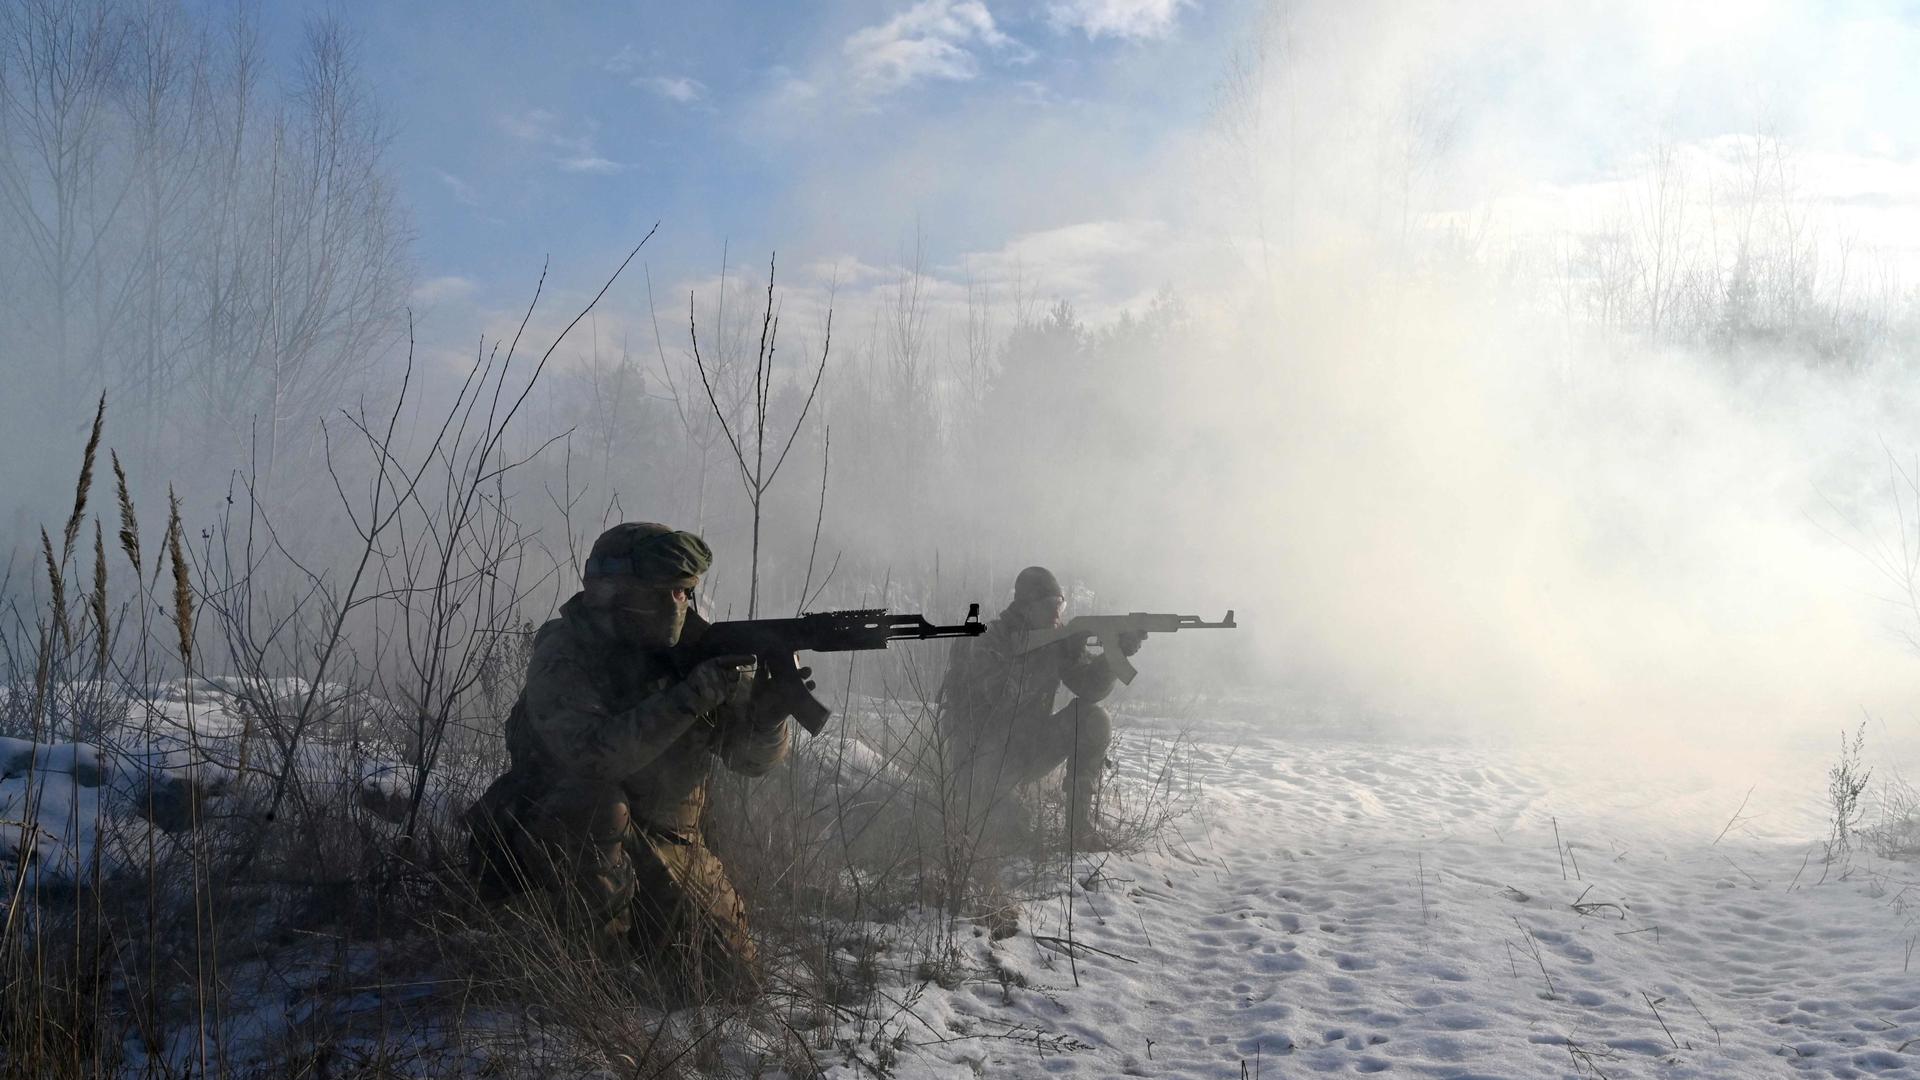 Ukrainian Territorial Defense Forces, the military reserve of the Ukrainian Armed Forces, take part in a military exercise near Kiev on 25 December.  The trainees are part of reservist battalions set-up to protect a district in Kiev in the event of an attack.